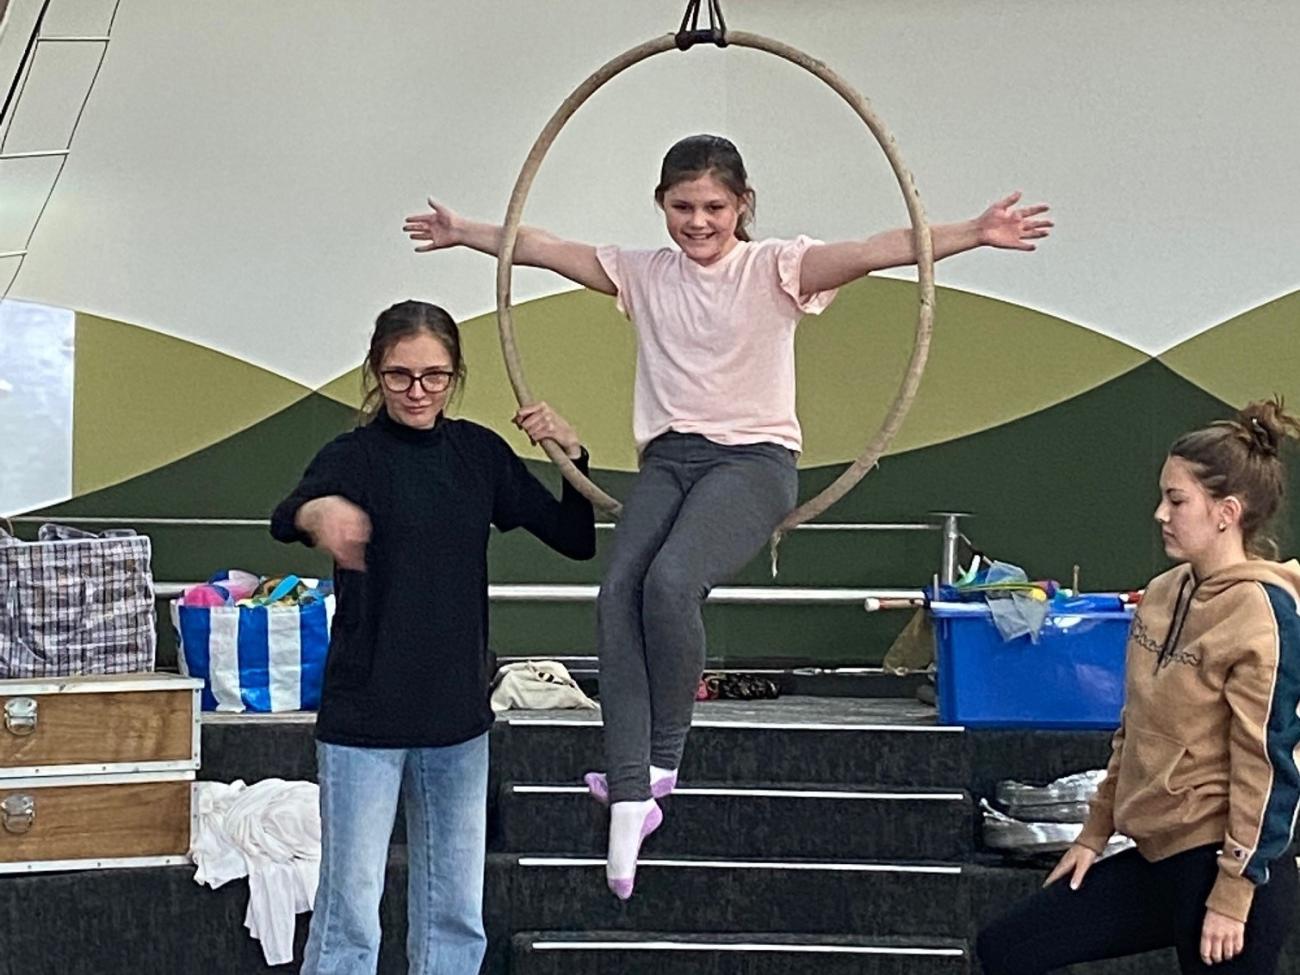 young student on circus lyra hoop being supported by 2 older students